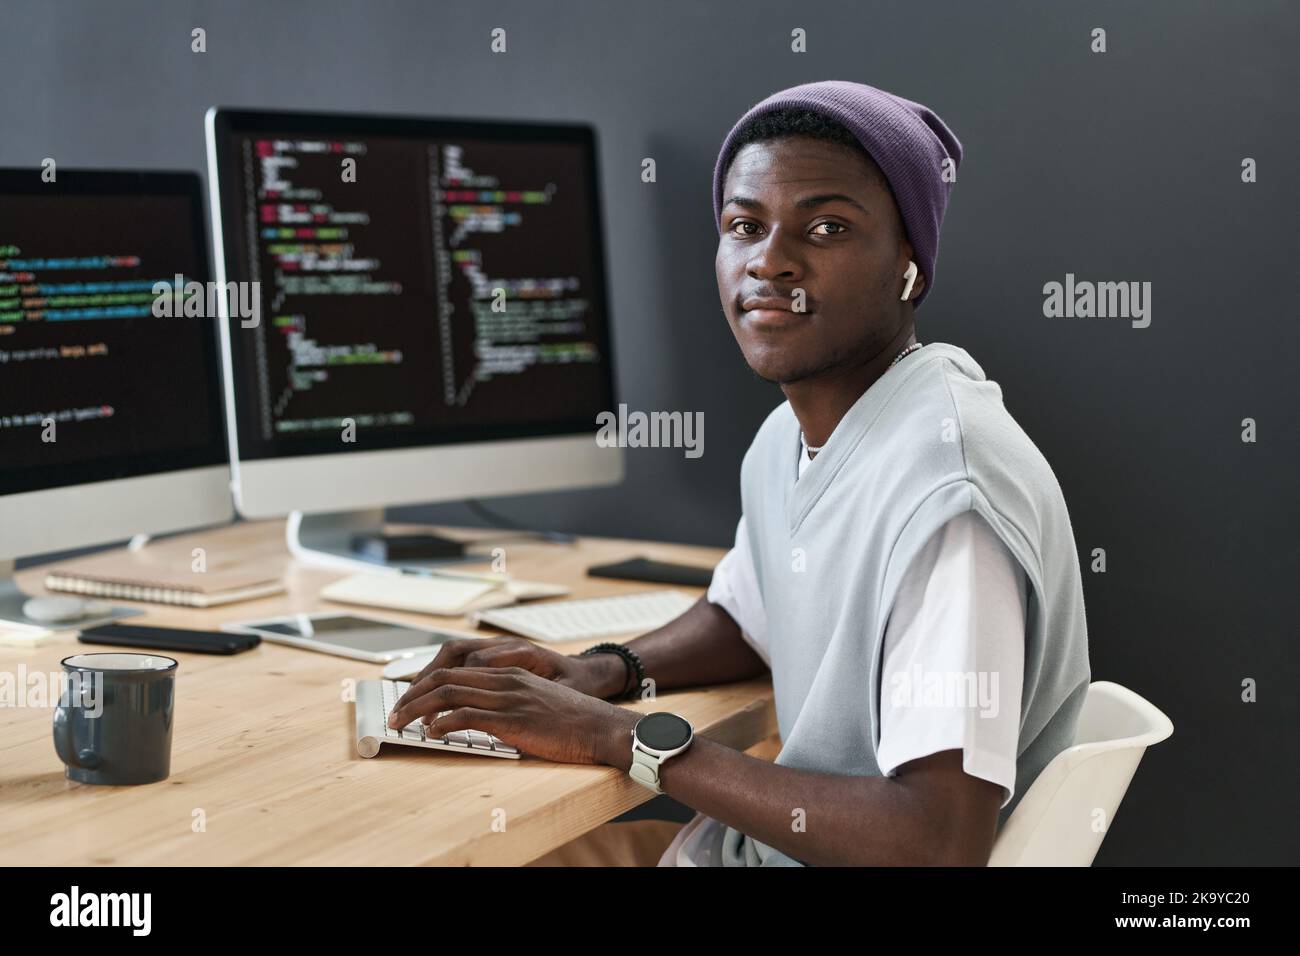 Young confident African American IT support manager looking at camera while sitting by workplace in front of computer monitors Stock Photo